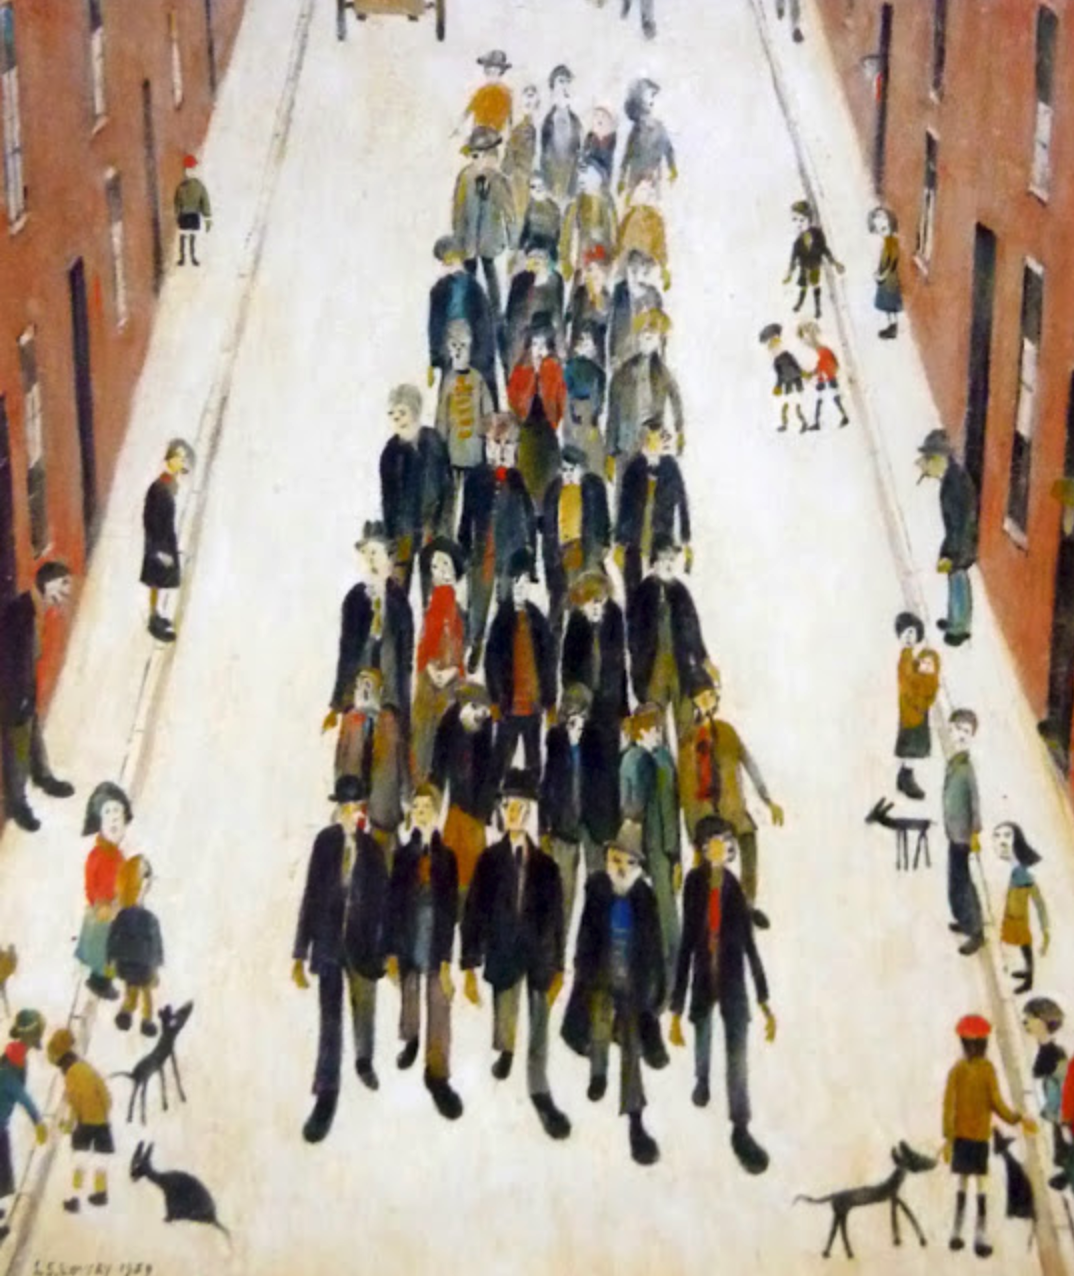 A Protest March (1959) by Laurence Stephen Lowry (1887 - 1976), English artist.